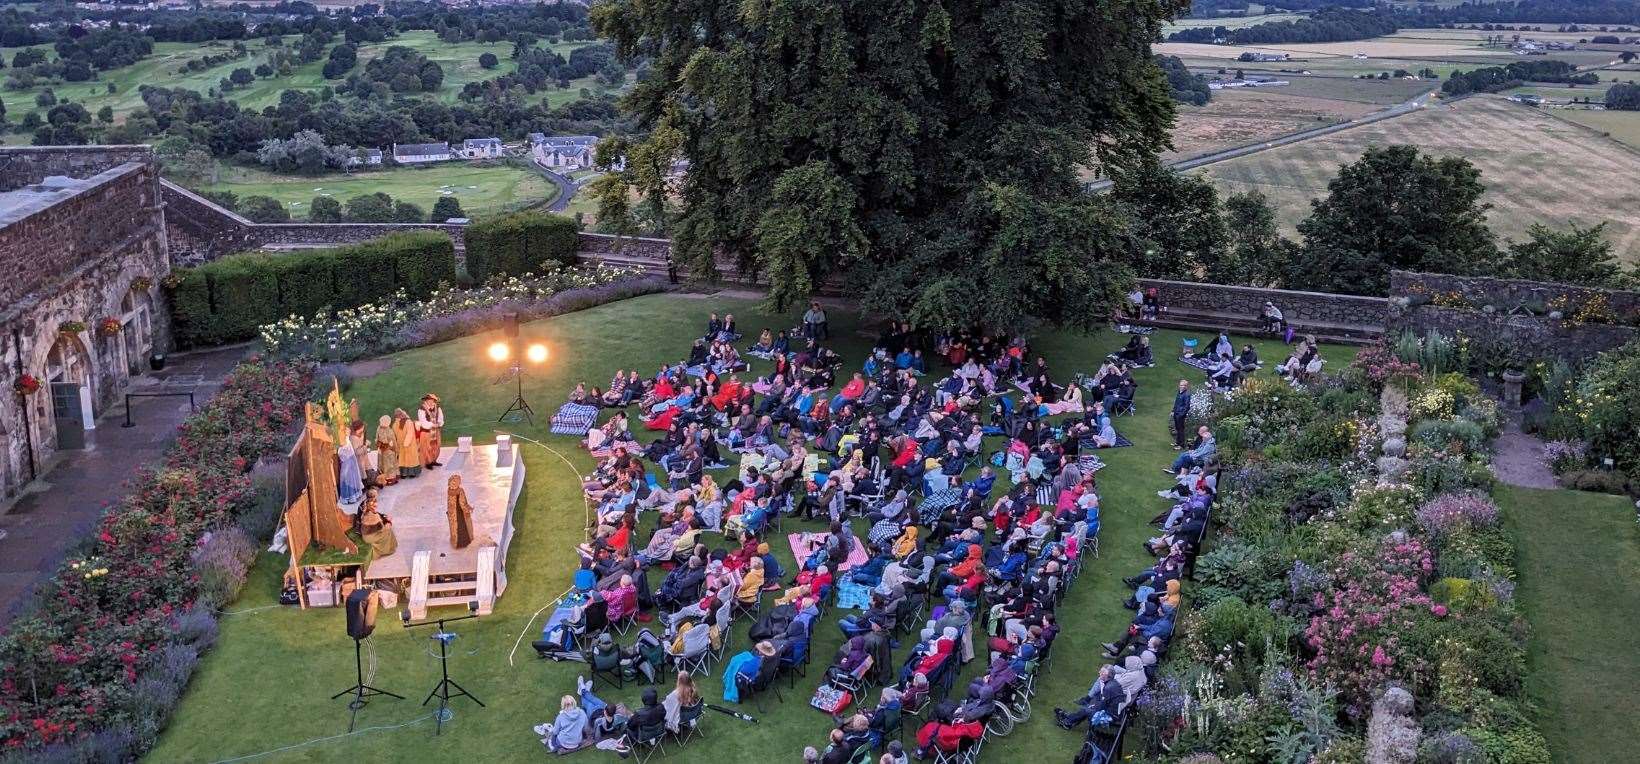 Soak up the summer vibes with outdoor theatre coming to Kent this year. Picture: Facebook / Chapterhouse Theatre